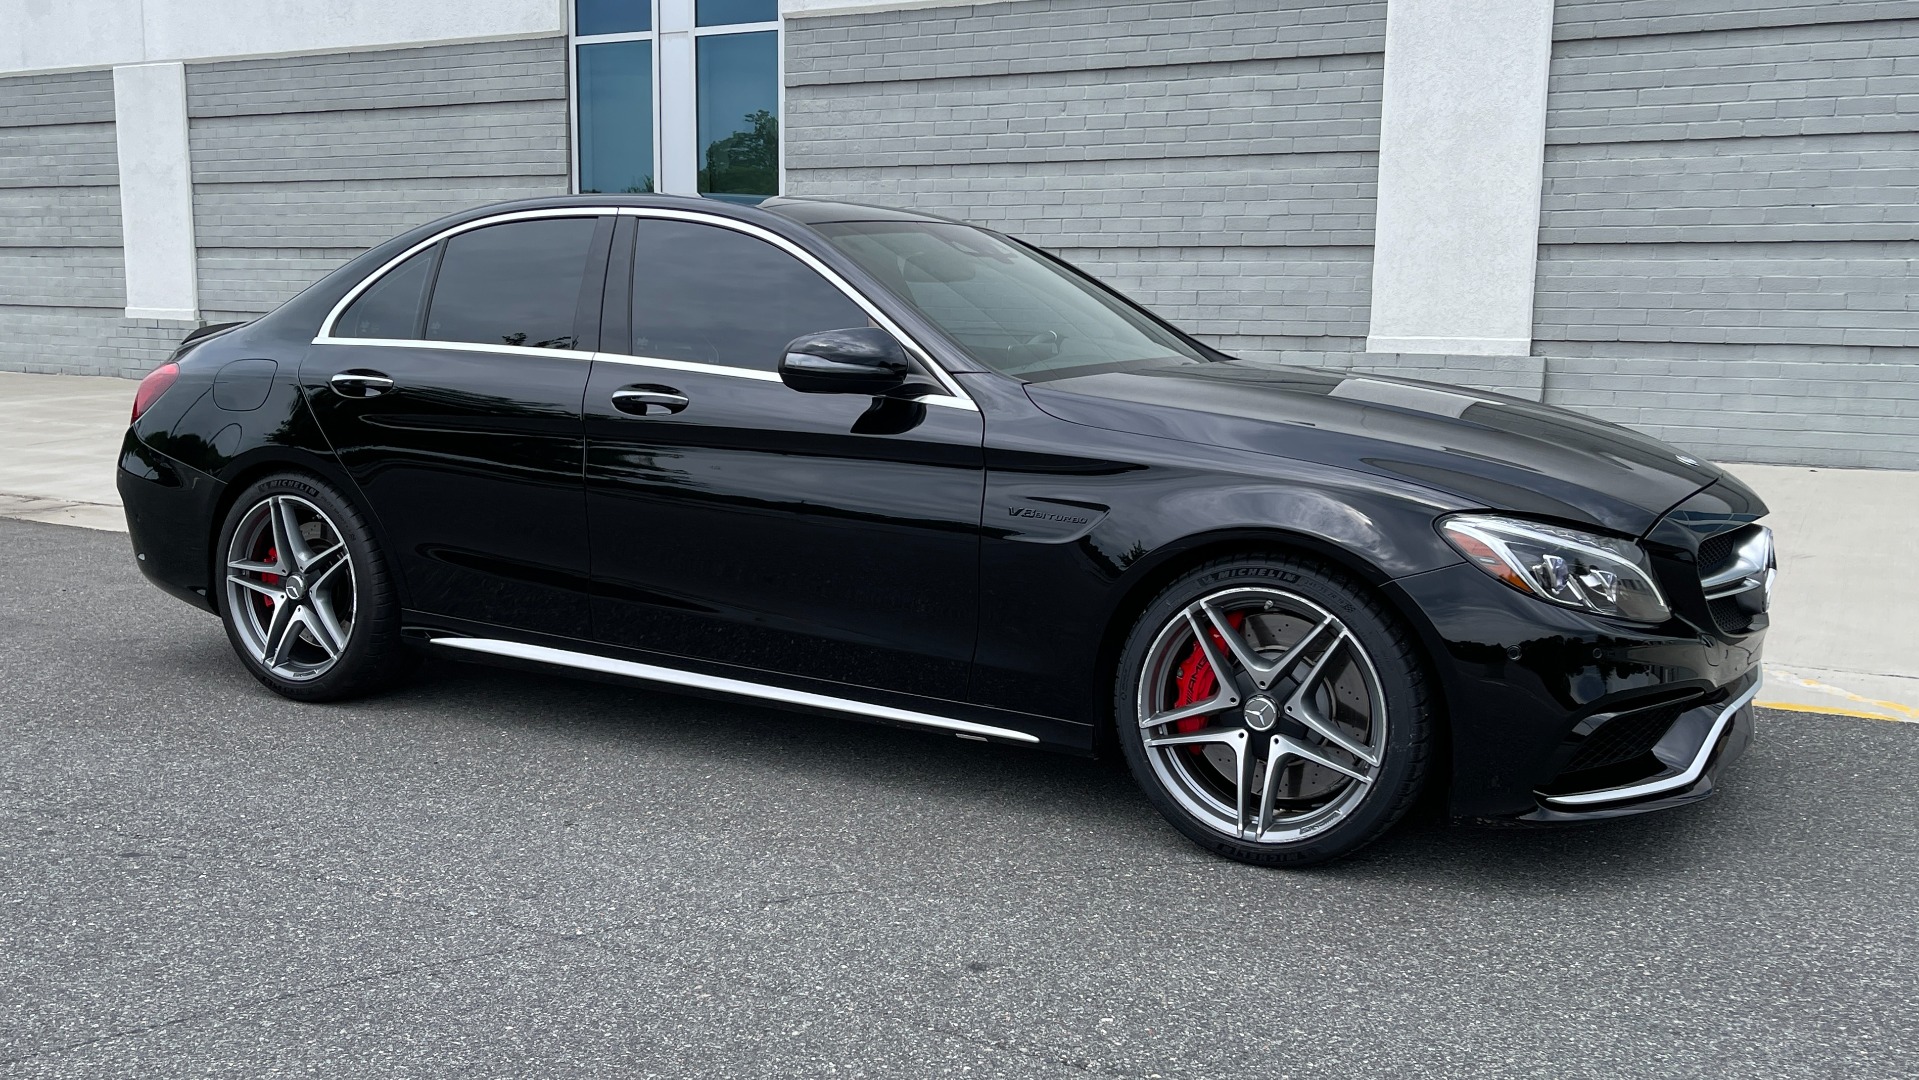 Used 2016 Mercedes-Benz C-CLASS AMG C 63 S SEDAN / NAV / BURMESTER / PANO-ROOF / CAMERA for sale $69,900 at Formula Imports in Charlotte NC 28227 6